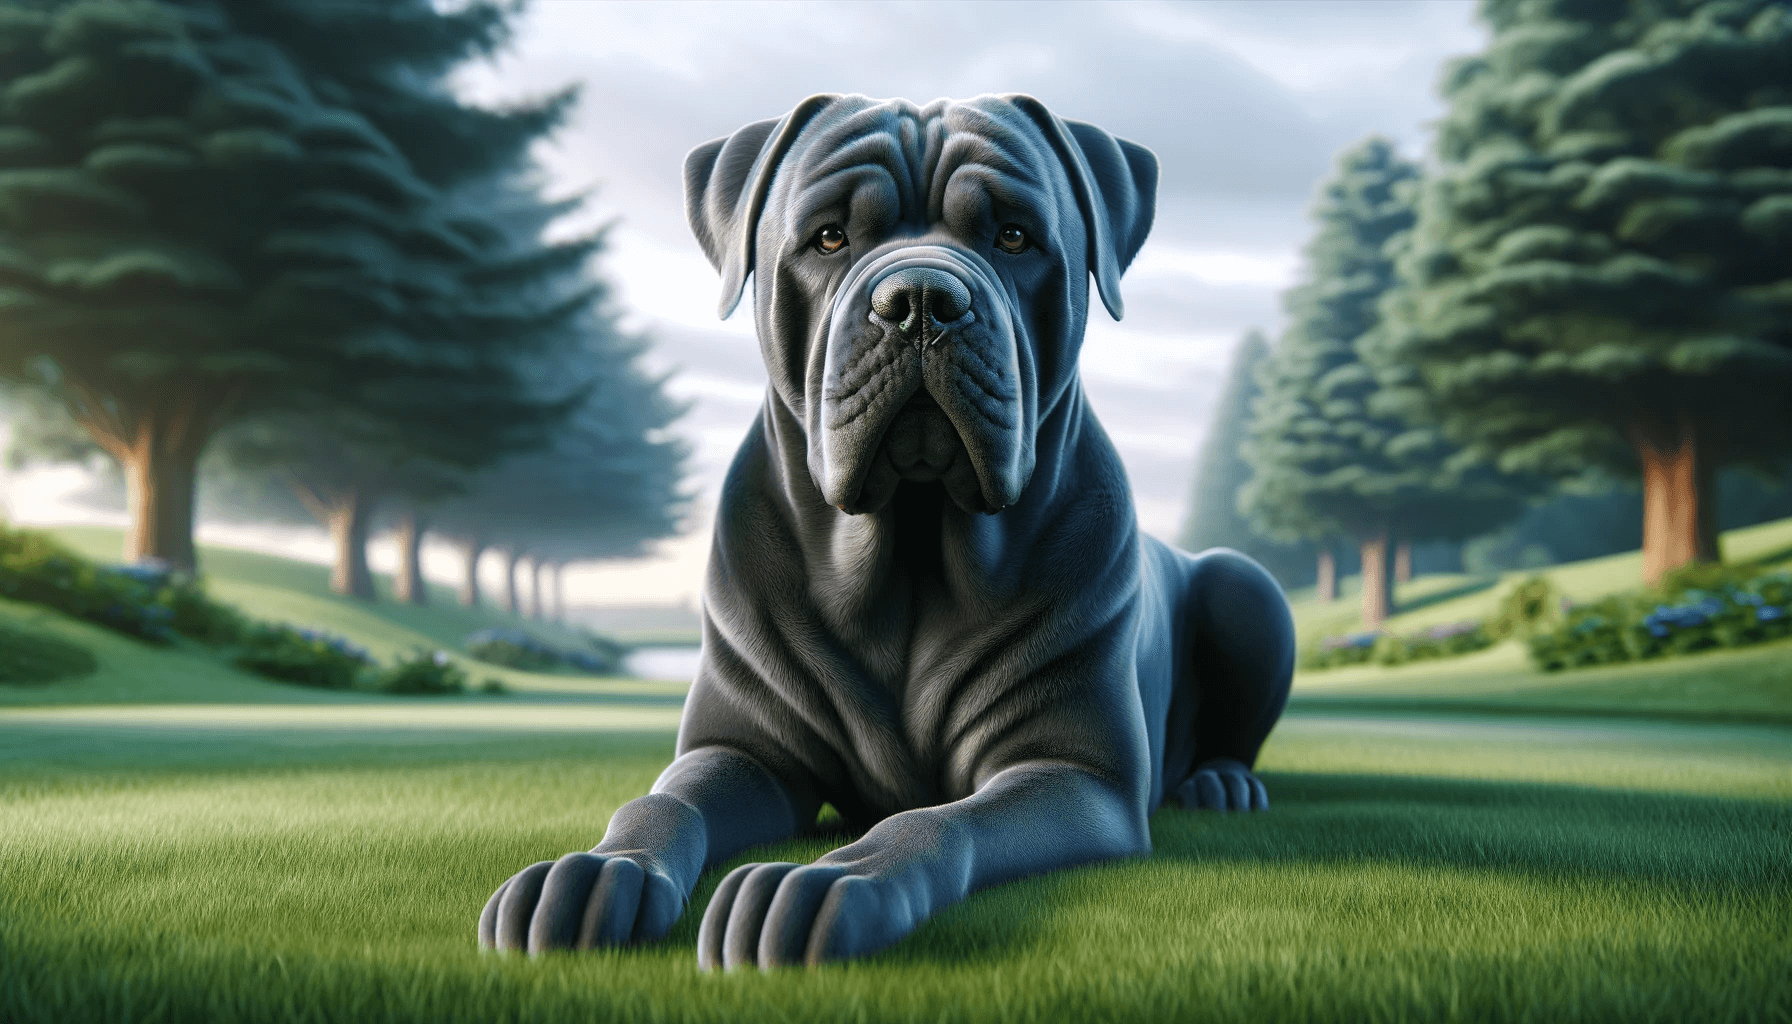 Blue Cane Corso with a Calm and Confident Expression Lying on a Grassy Field